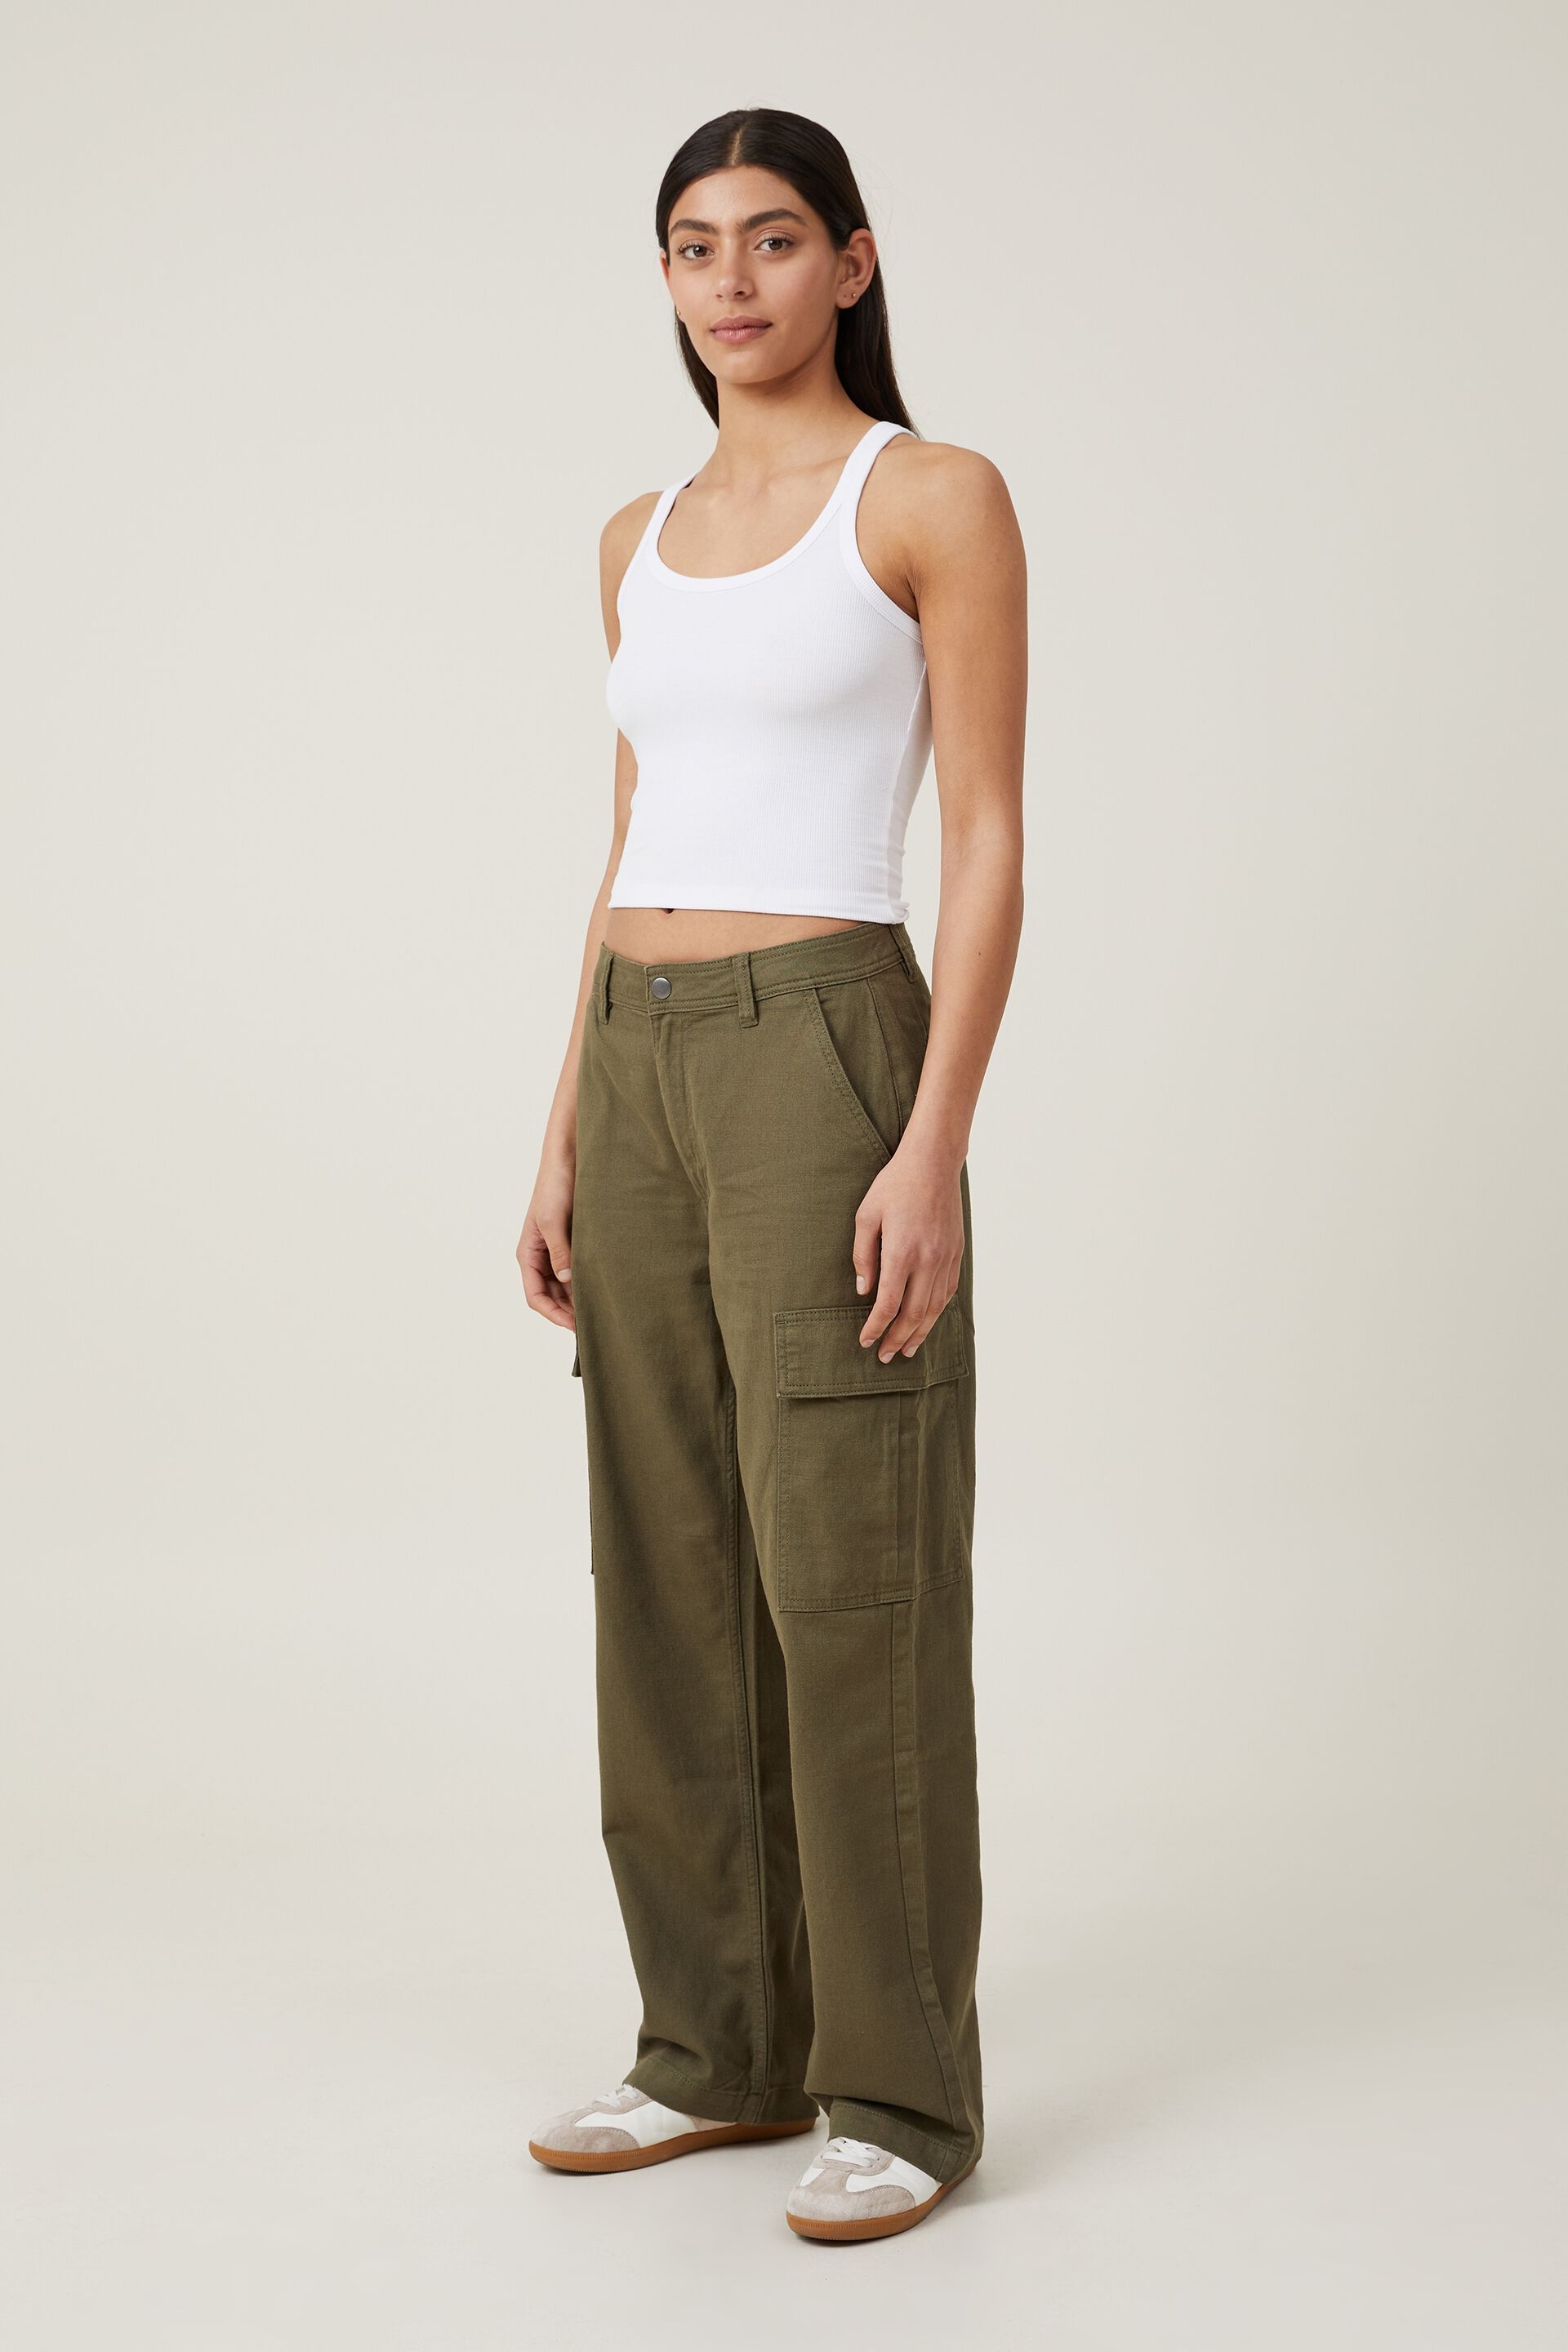 Loom Black Cotton Cargo Pants | Urban Outfitters UK